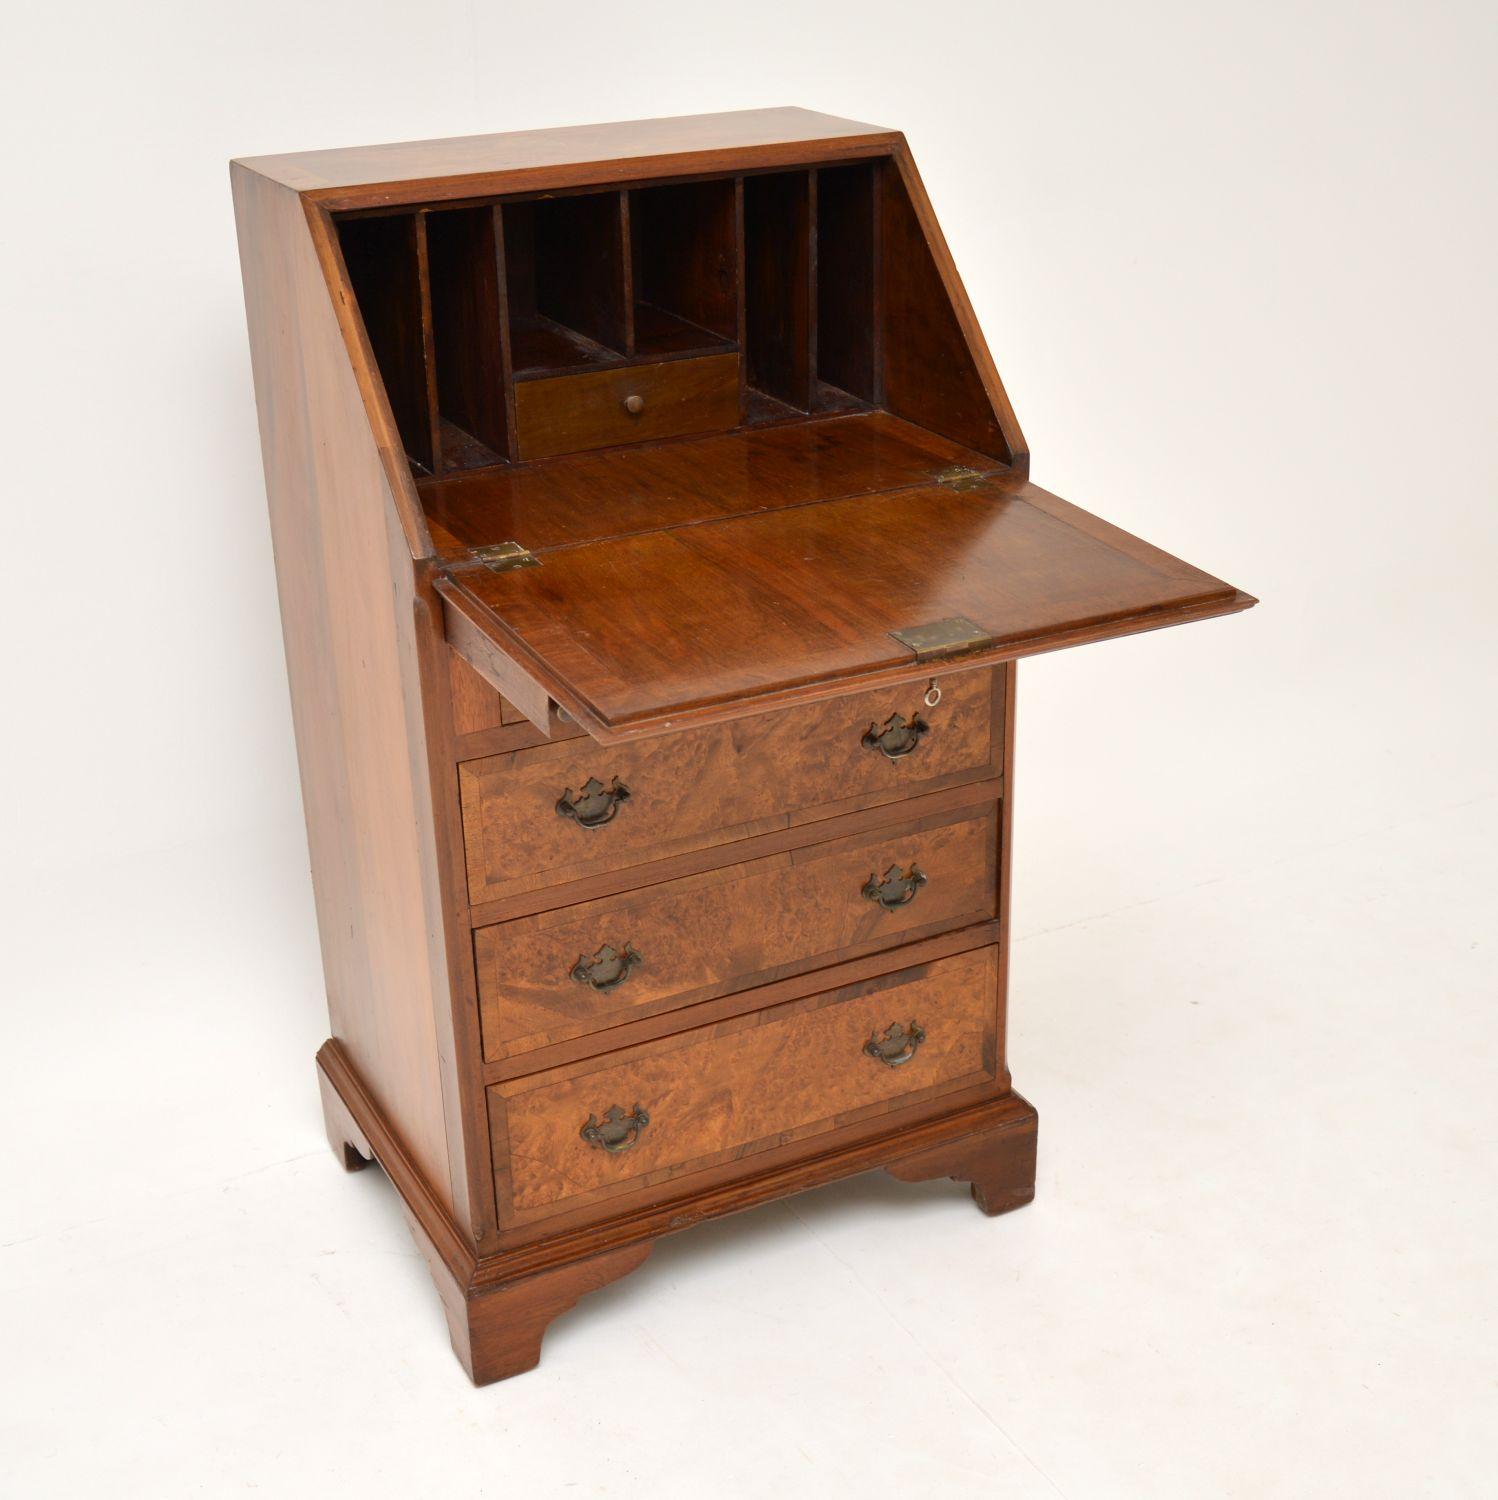 A smart and very useful antique writing bureau, beautifully made from burr walnut. This is in the antique Georgian style & dates from circa 1900s-1920s

It’s of very high quality and is a great size. It is slim and doesn’t take up too much space,